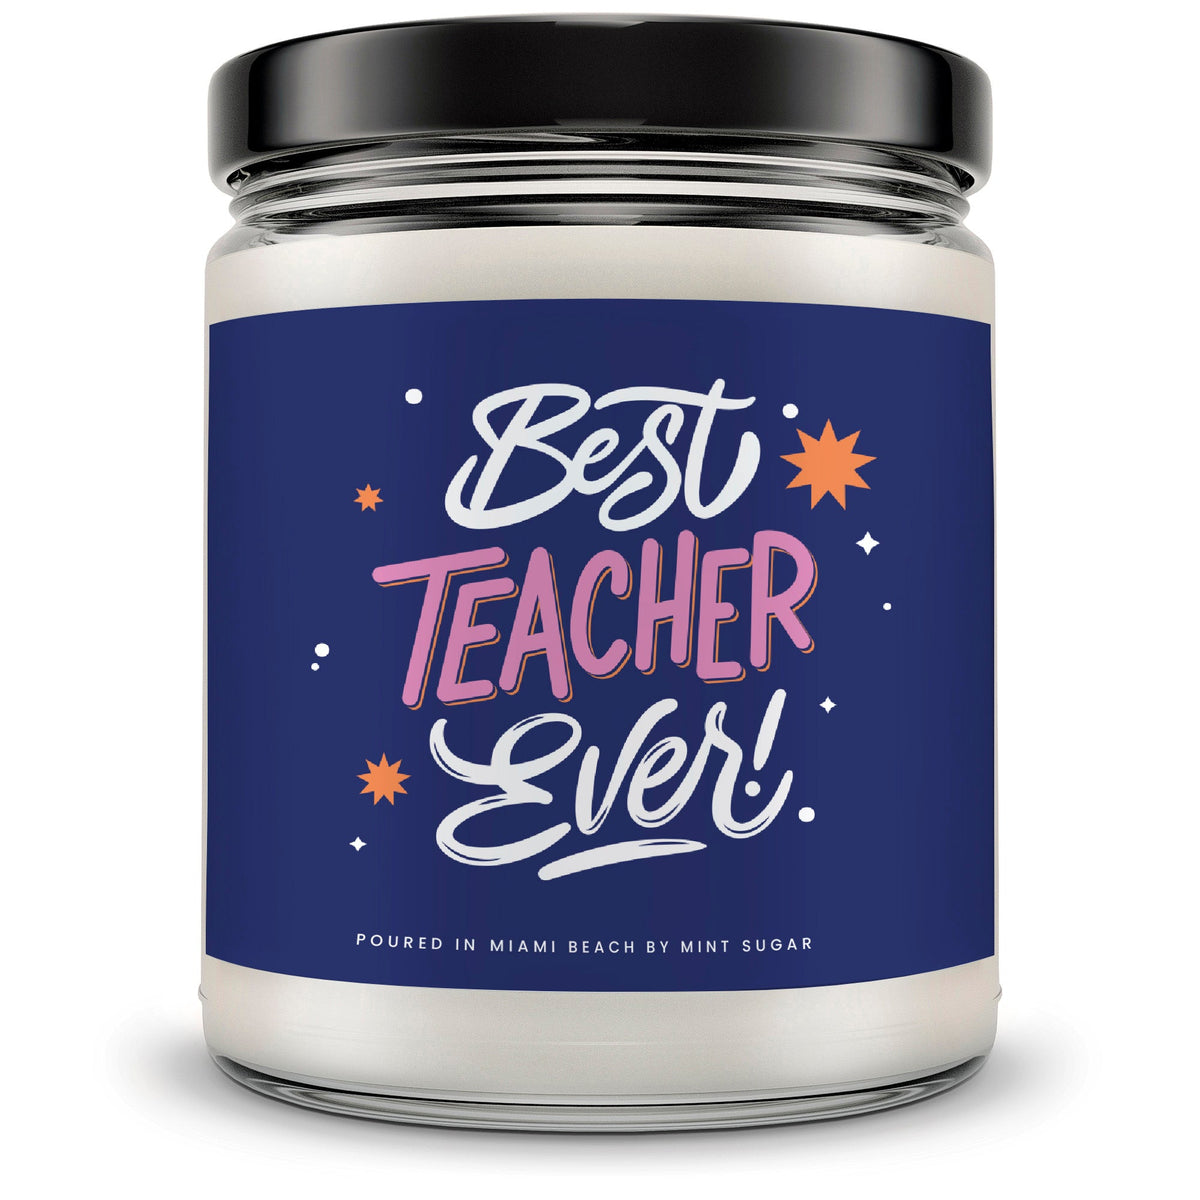 Best Teacher Ever Candle - Mint Sugar Candle